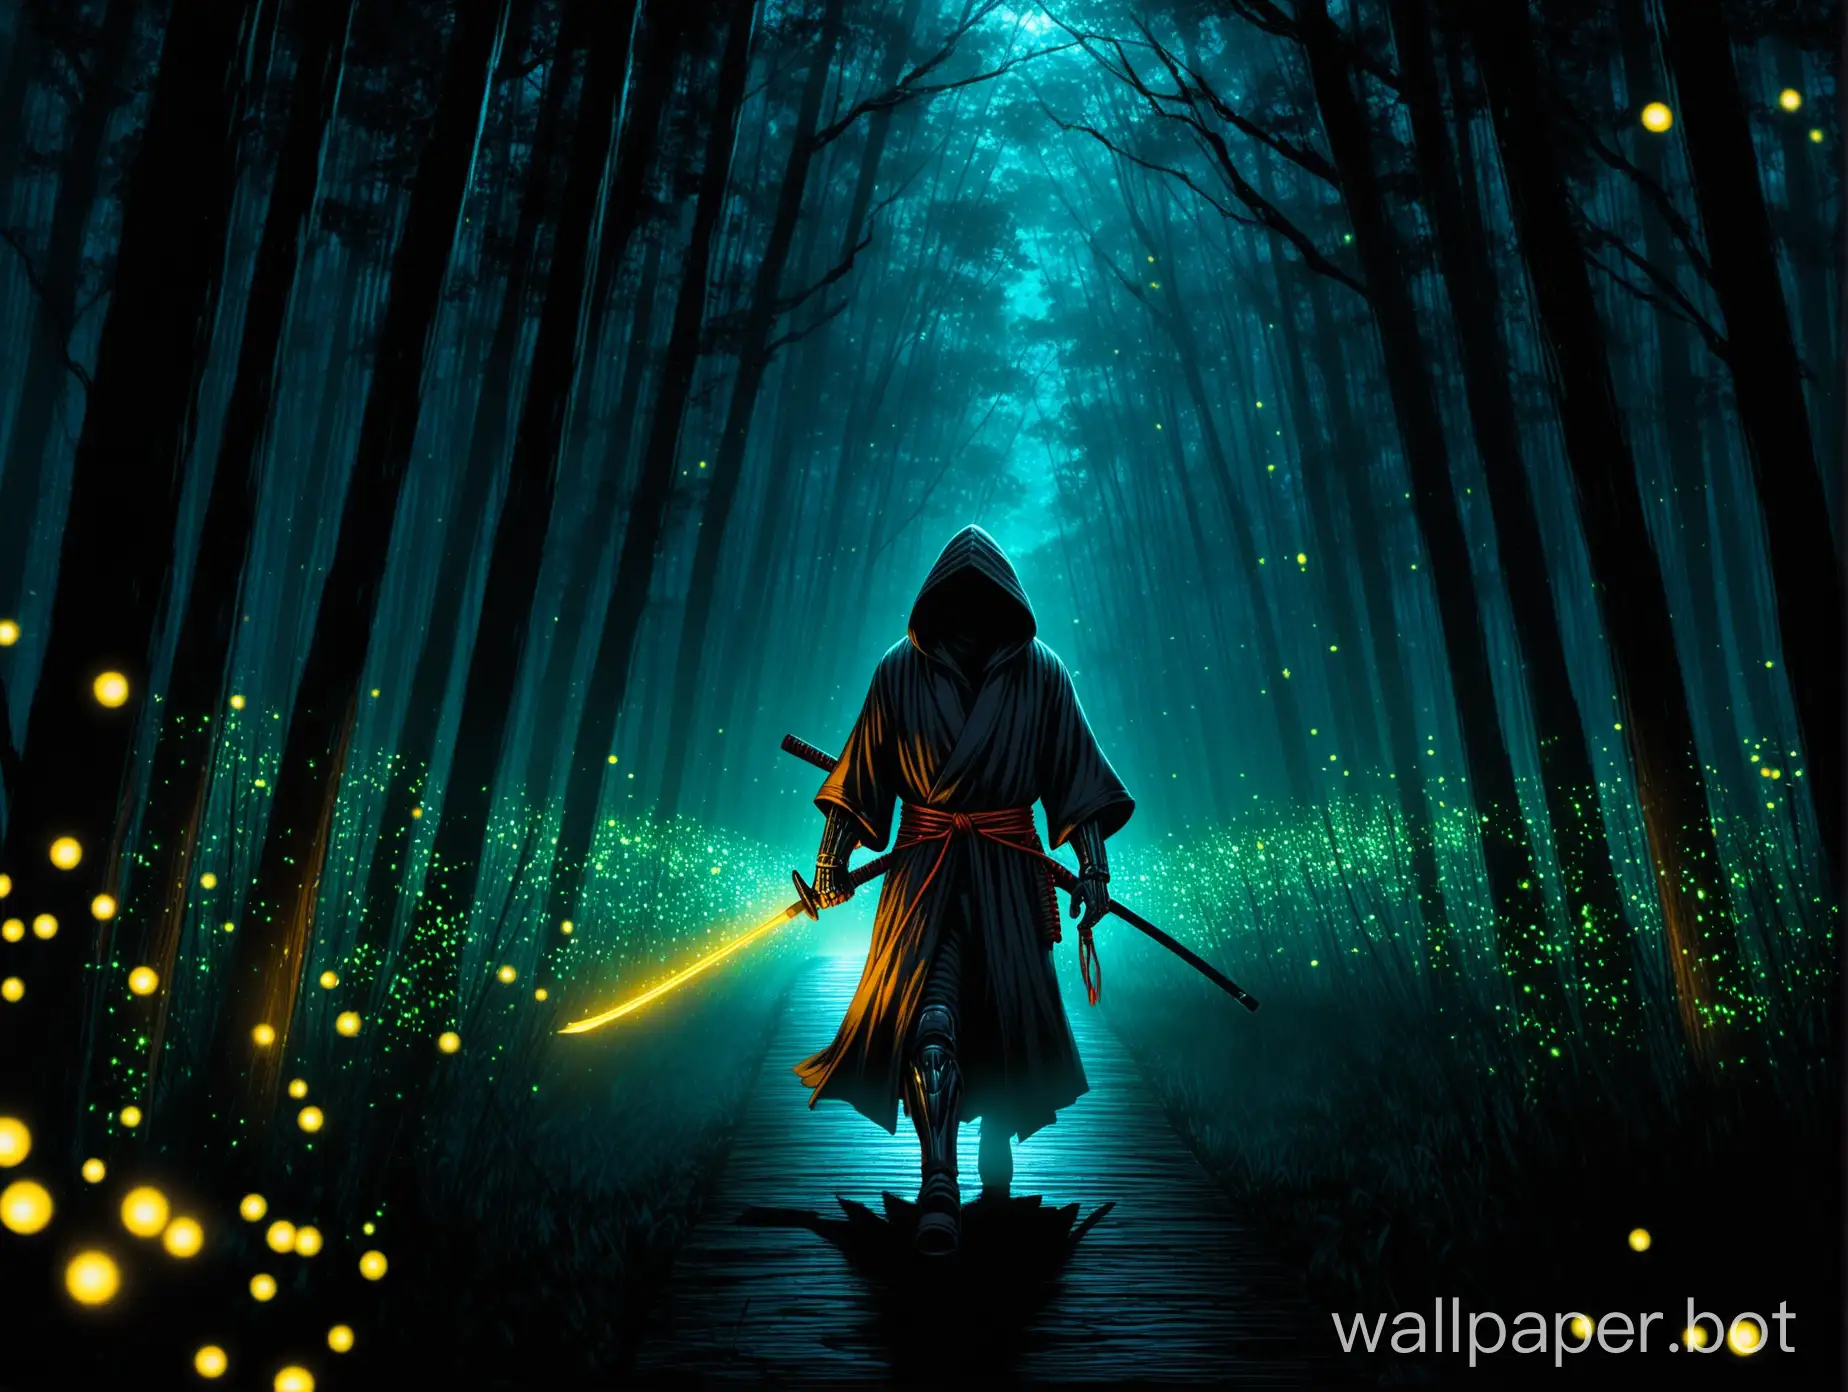 Hooded-Hero-in-Enchanted-Forest-Searching-for-the-Monster-with-Glowing-Eyes